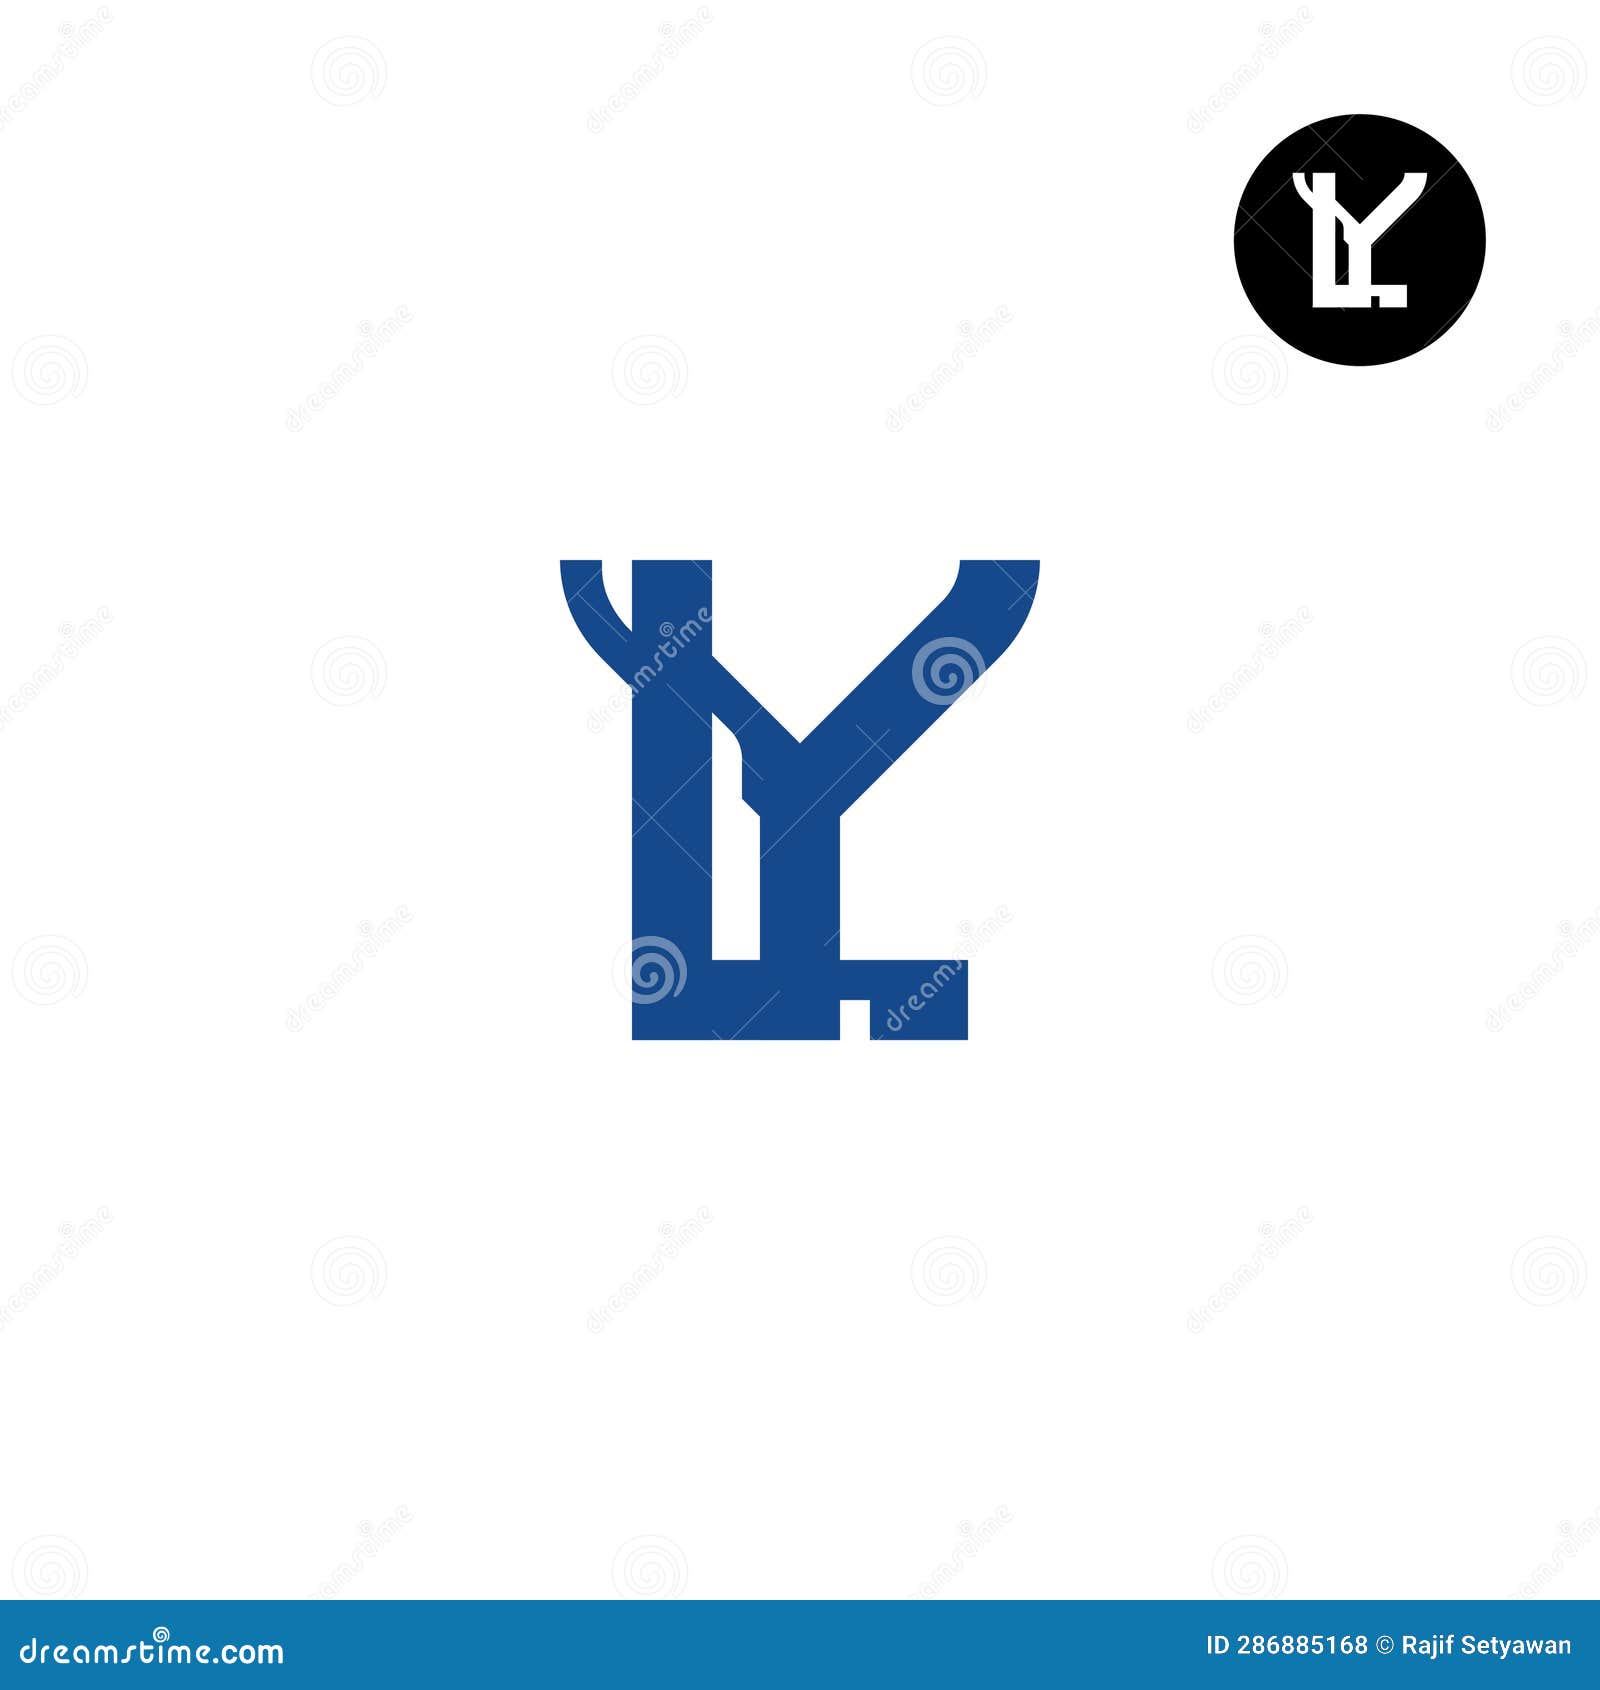 Simple YL Monogram Logo, suitable for any business with YL or LY